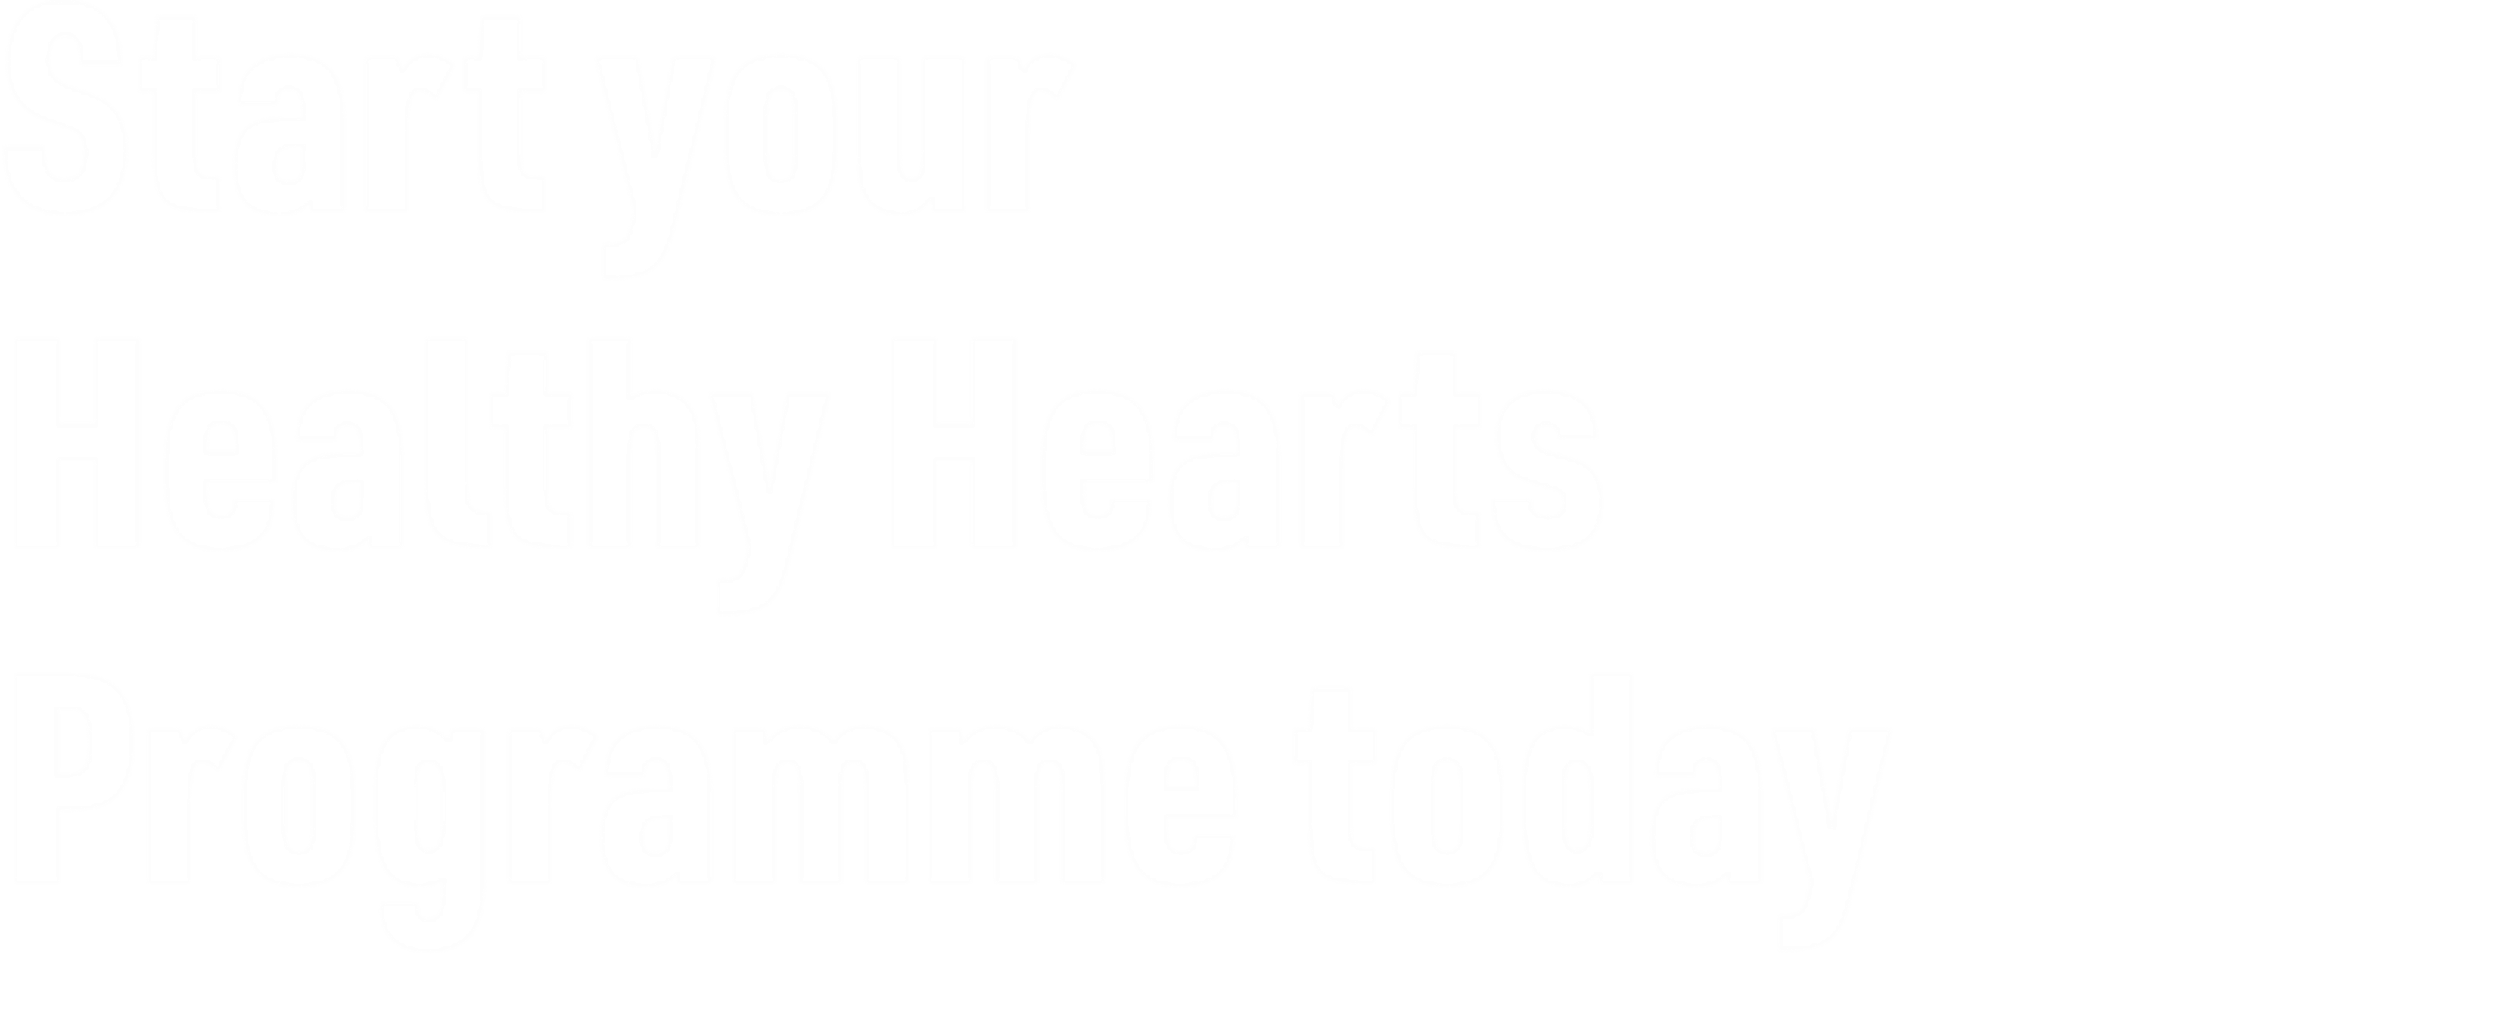 Start your Healthy Hearts Programme today